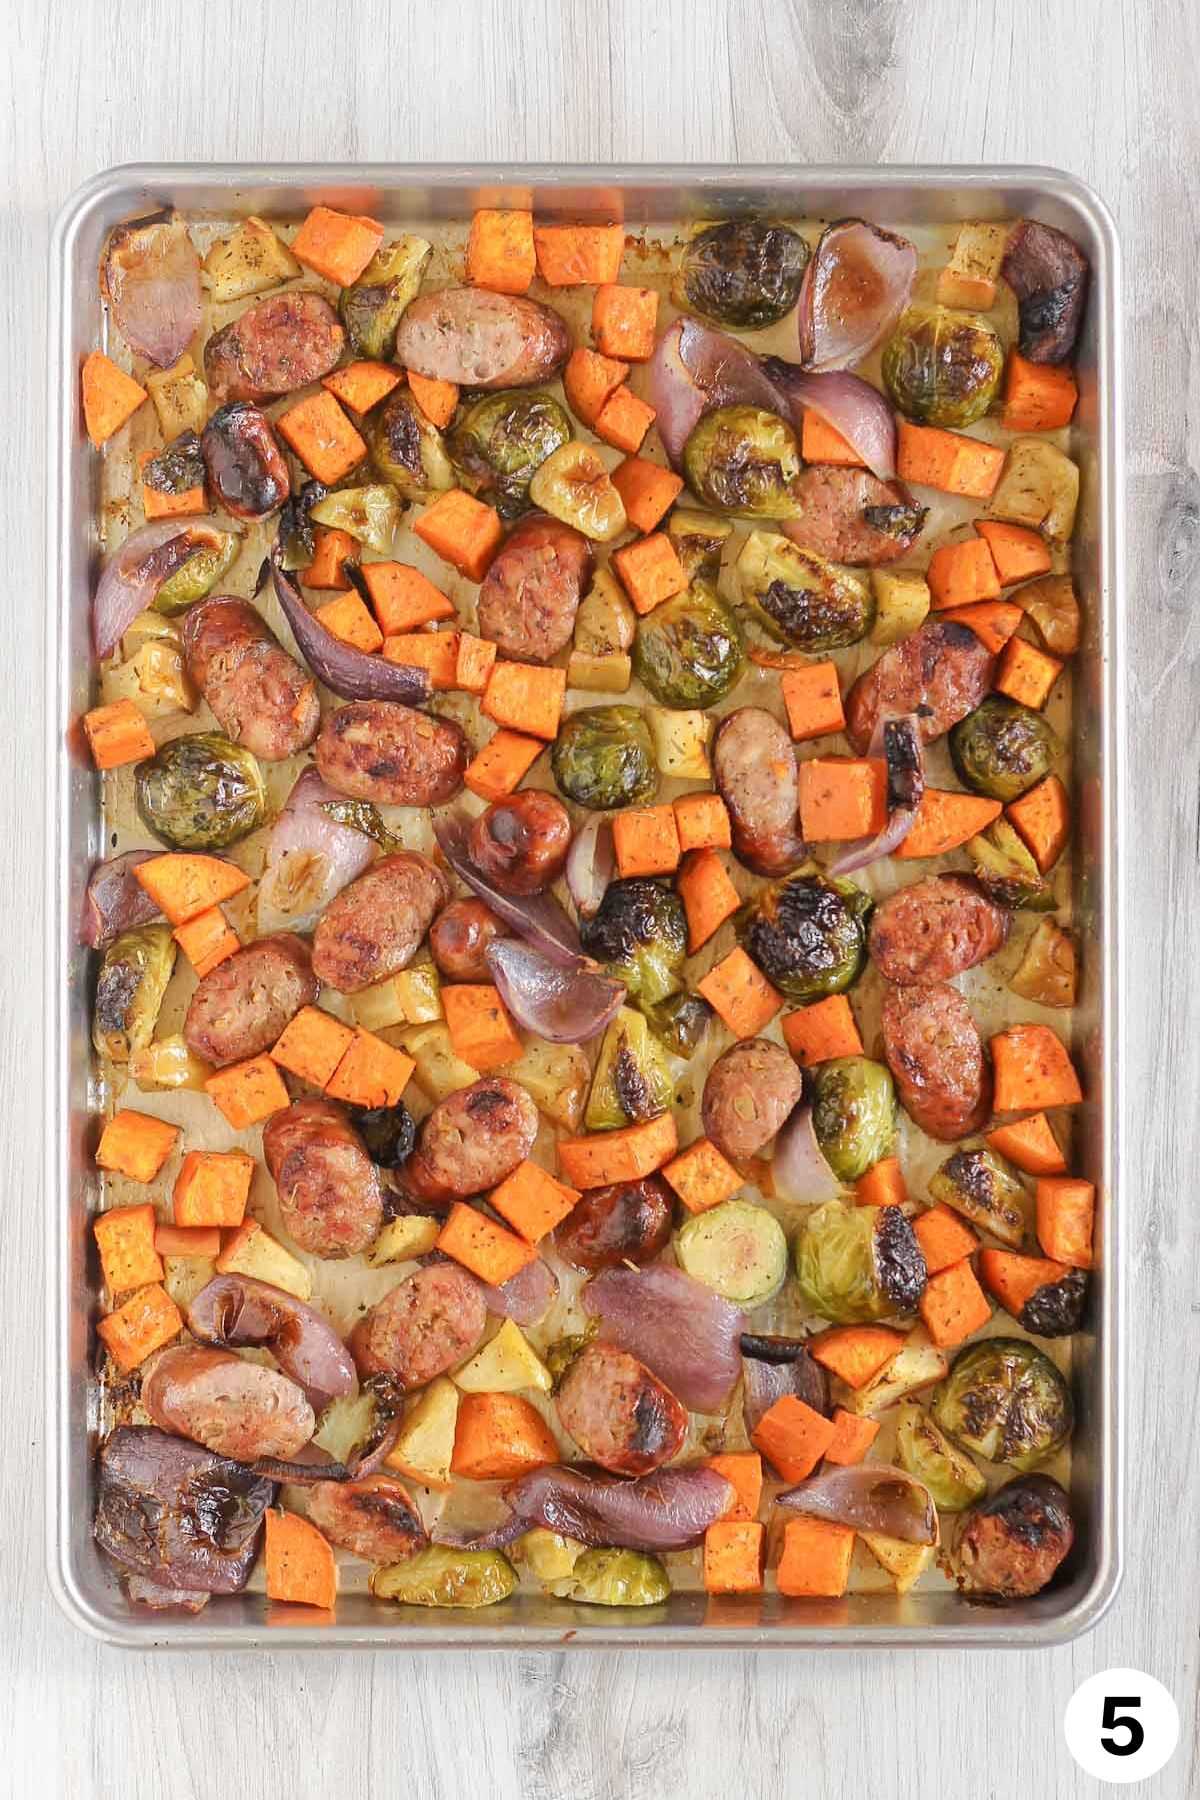 Roasted vegetables, apples, and chicken sausage on a large baking sheet.